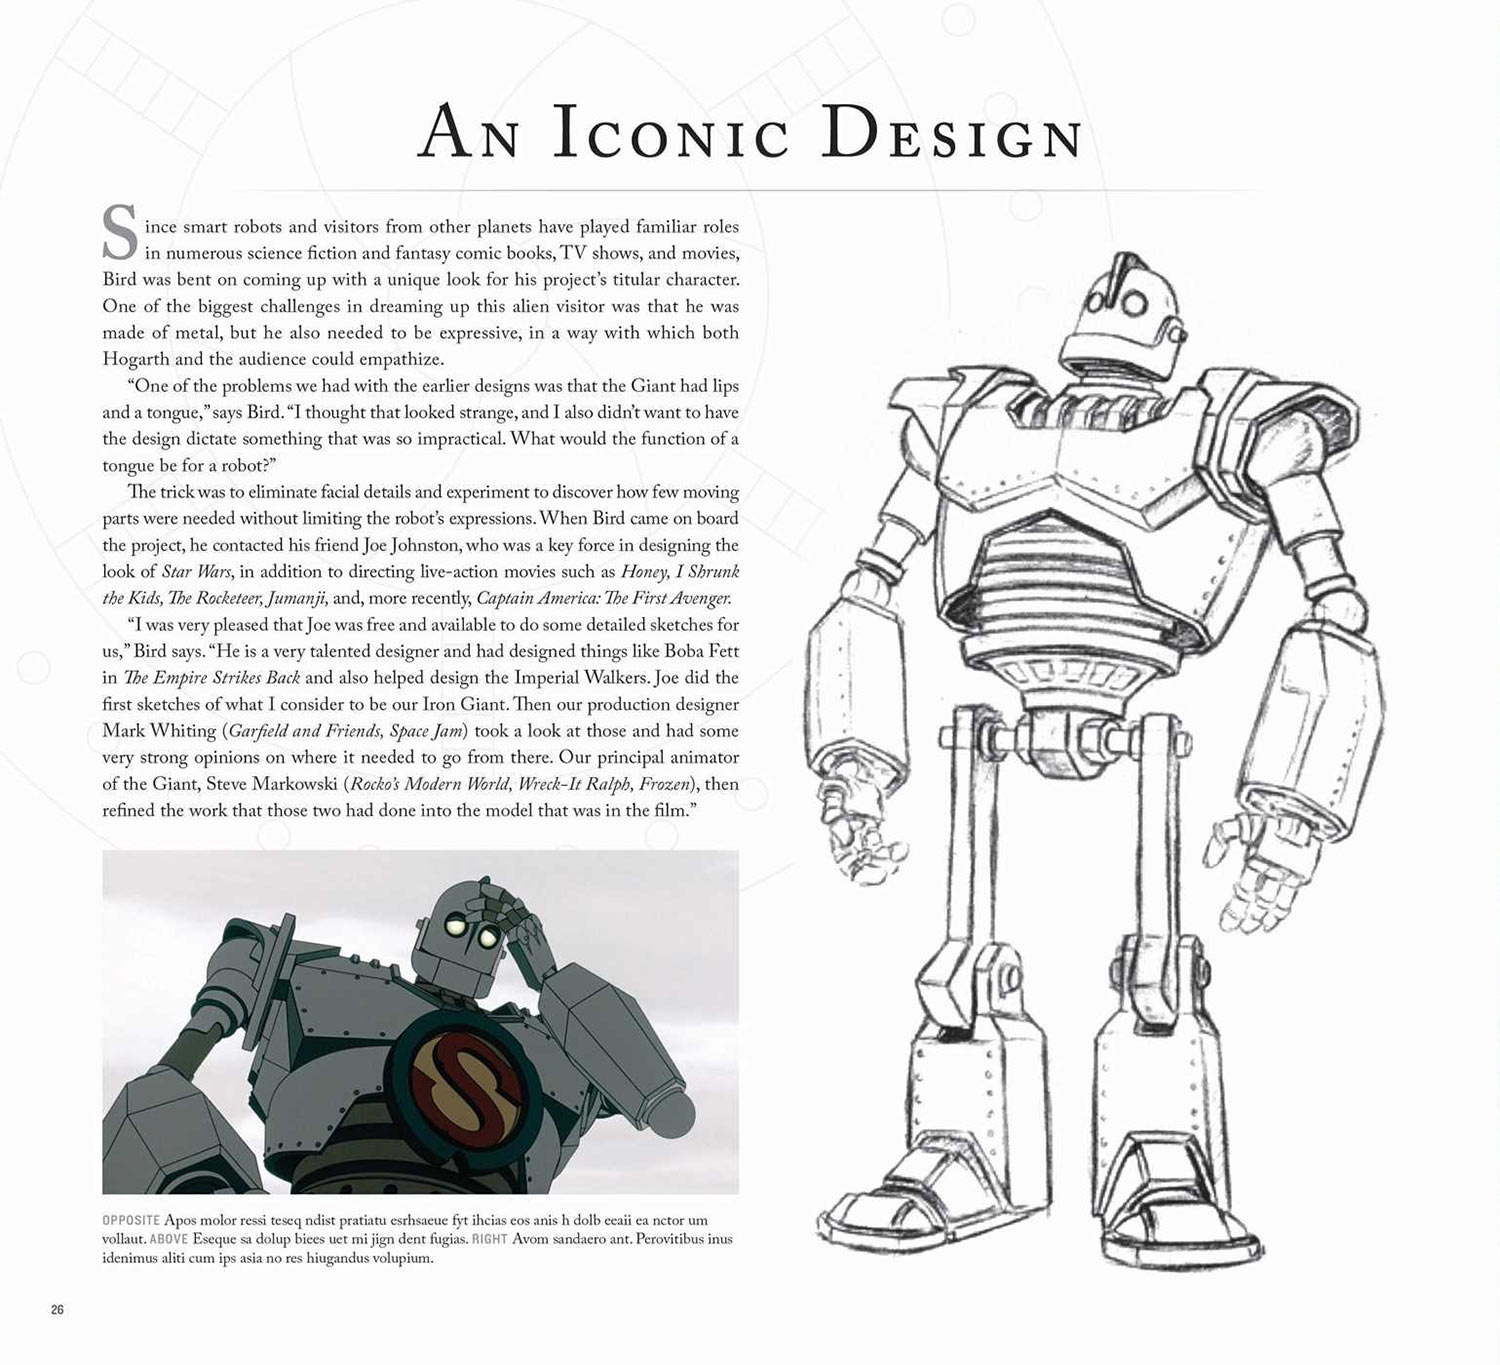 Sample Page from “The Art of the Iron Giant”